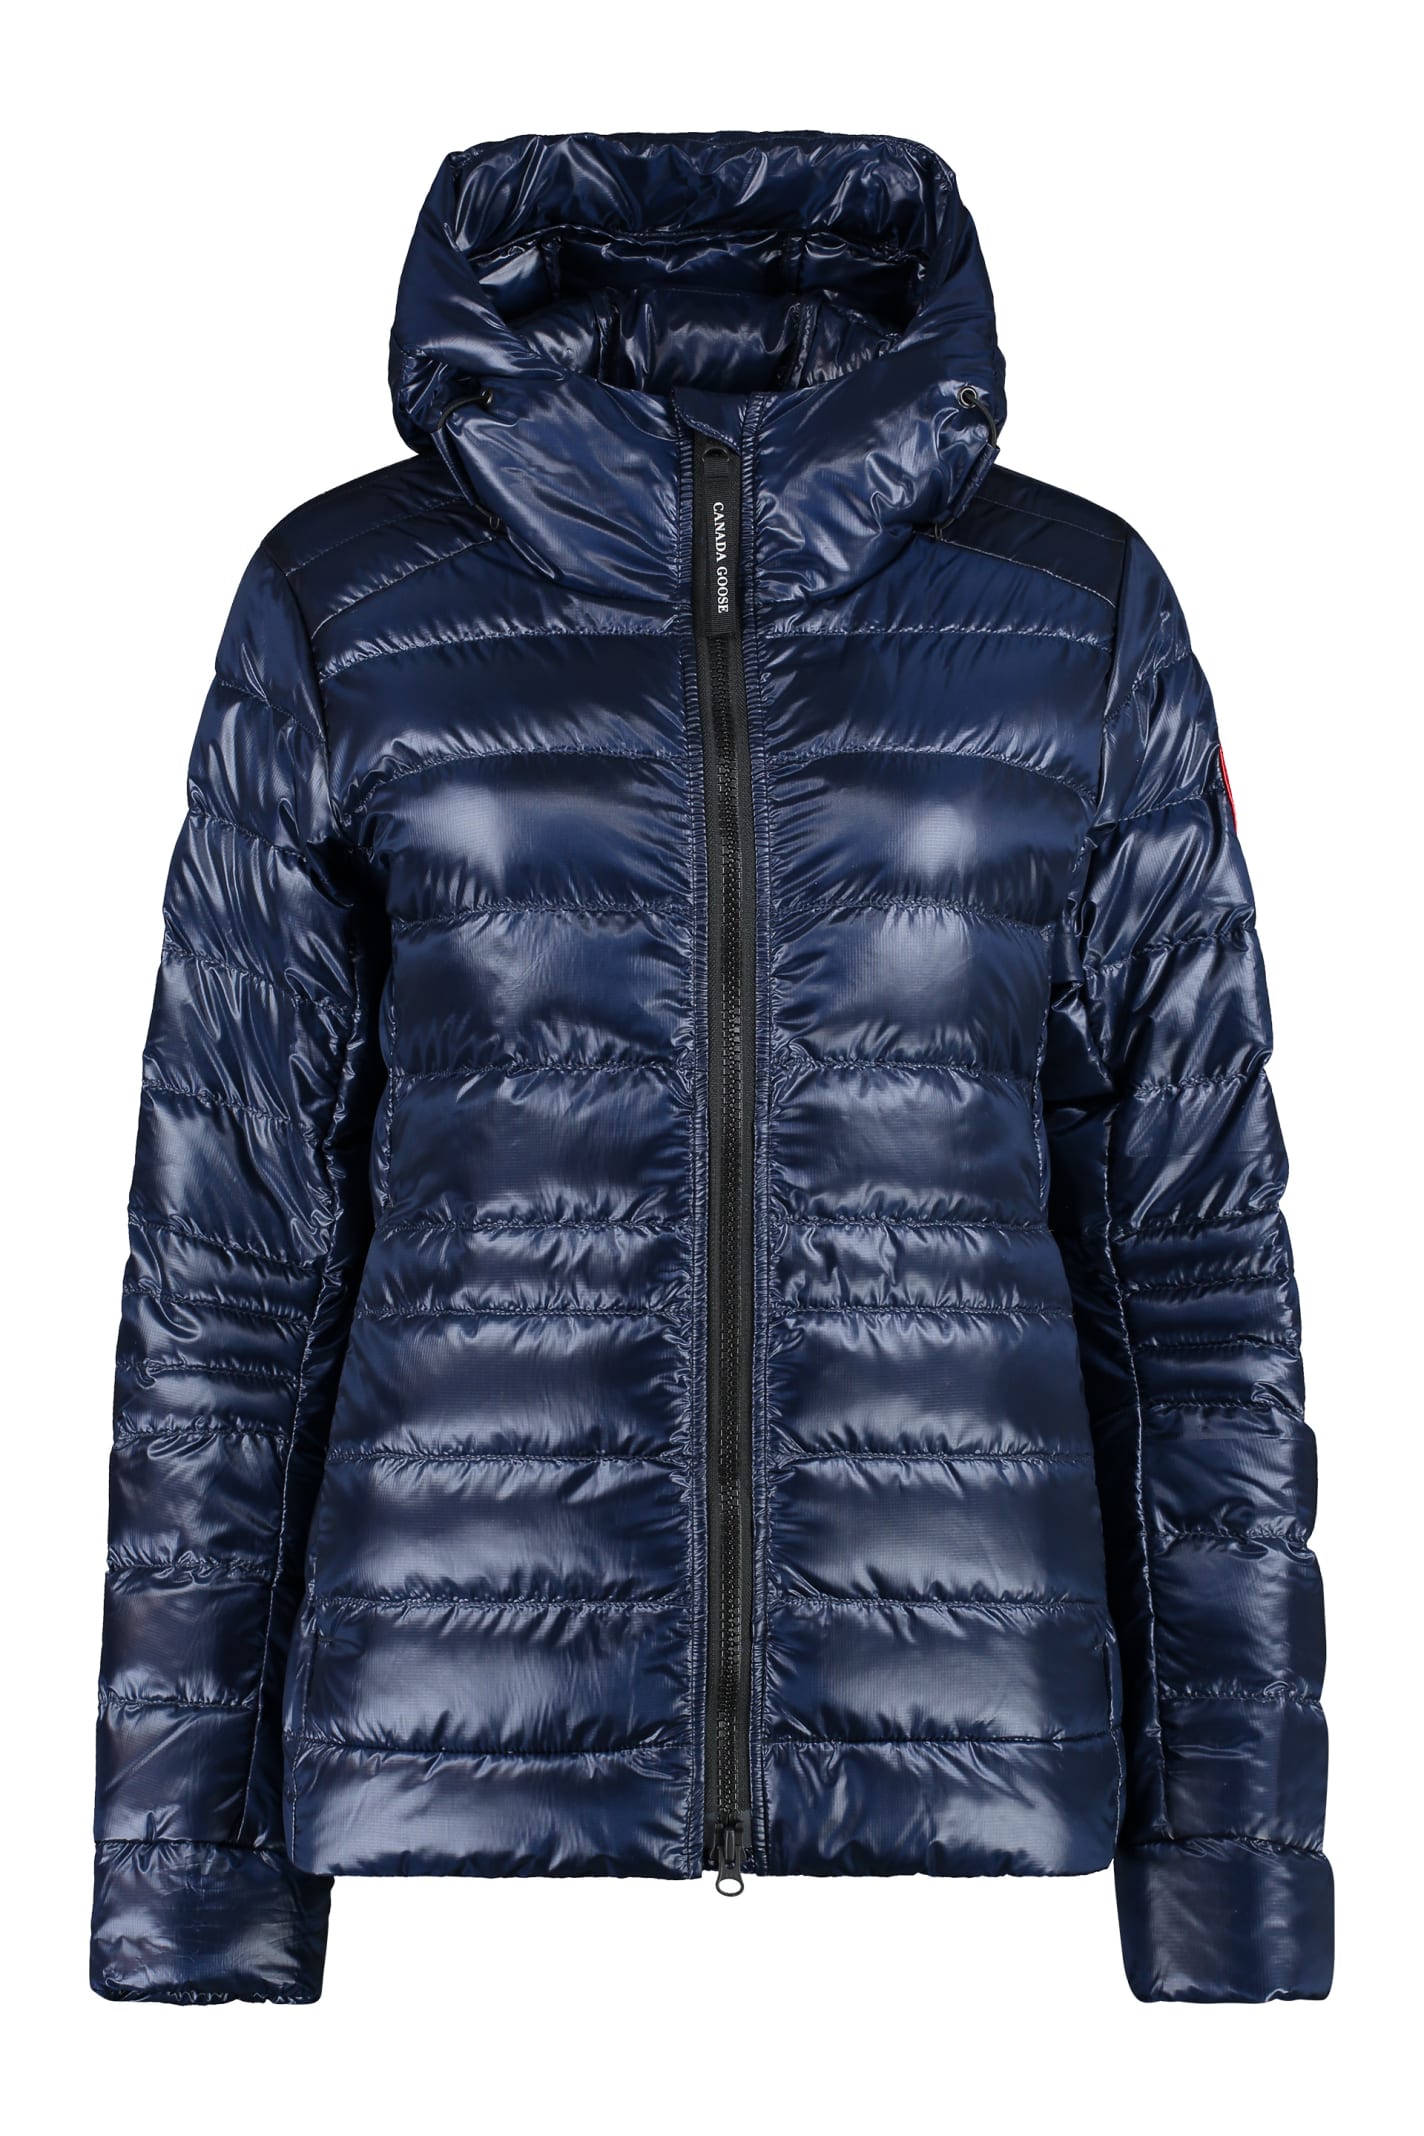 Canada Goose Cypress Hooded Short Down Jacket